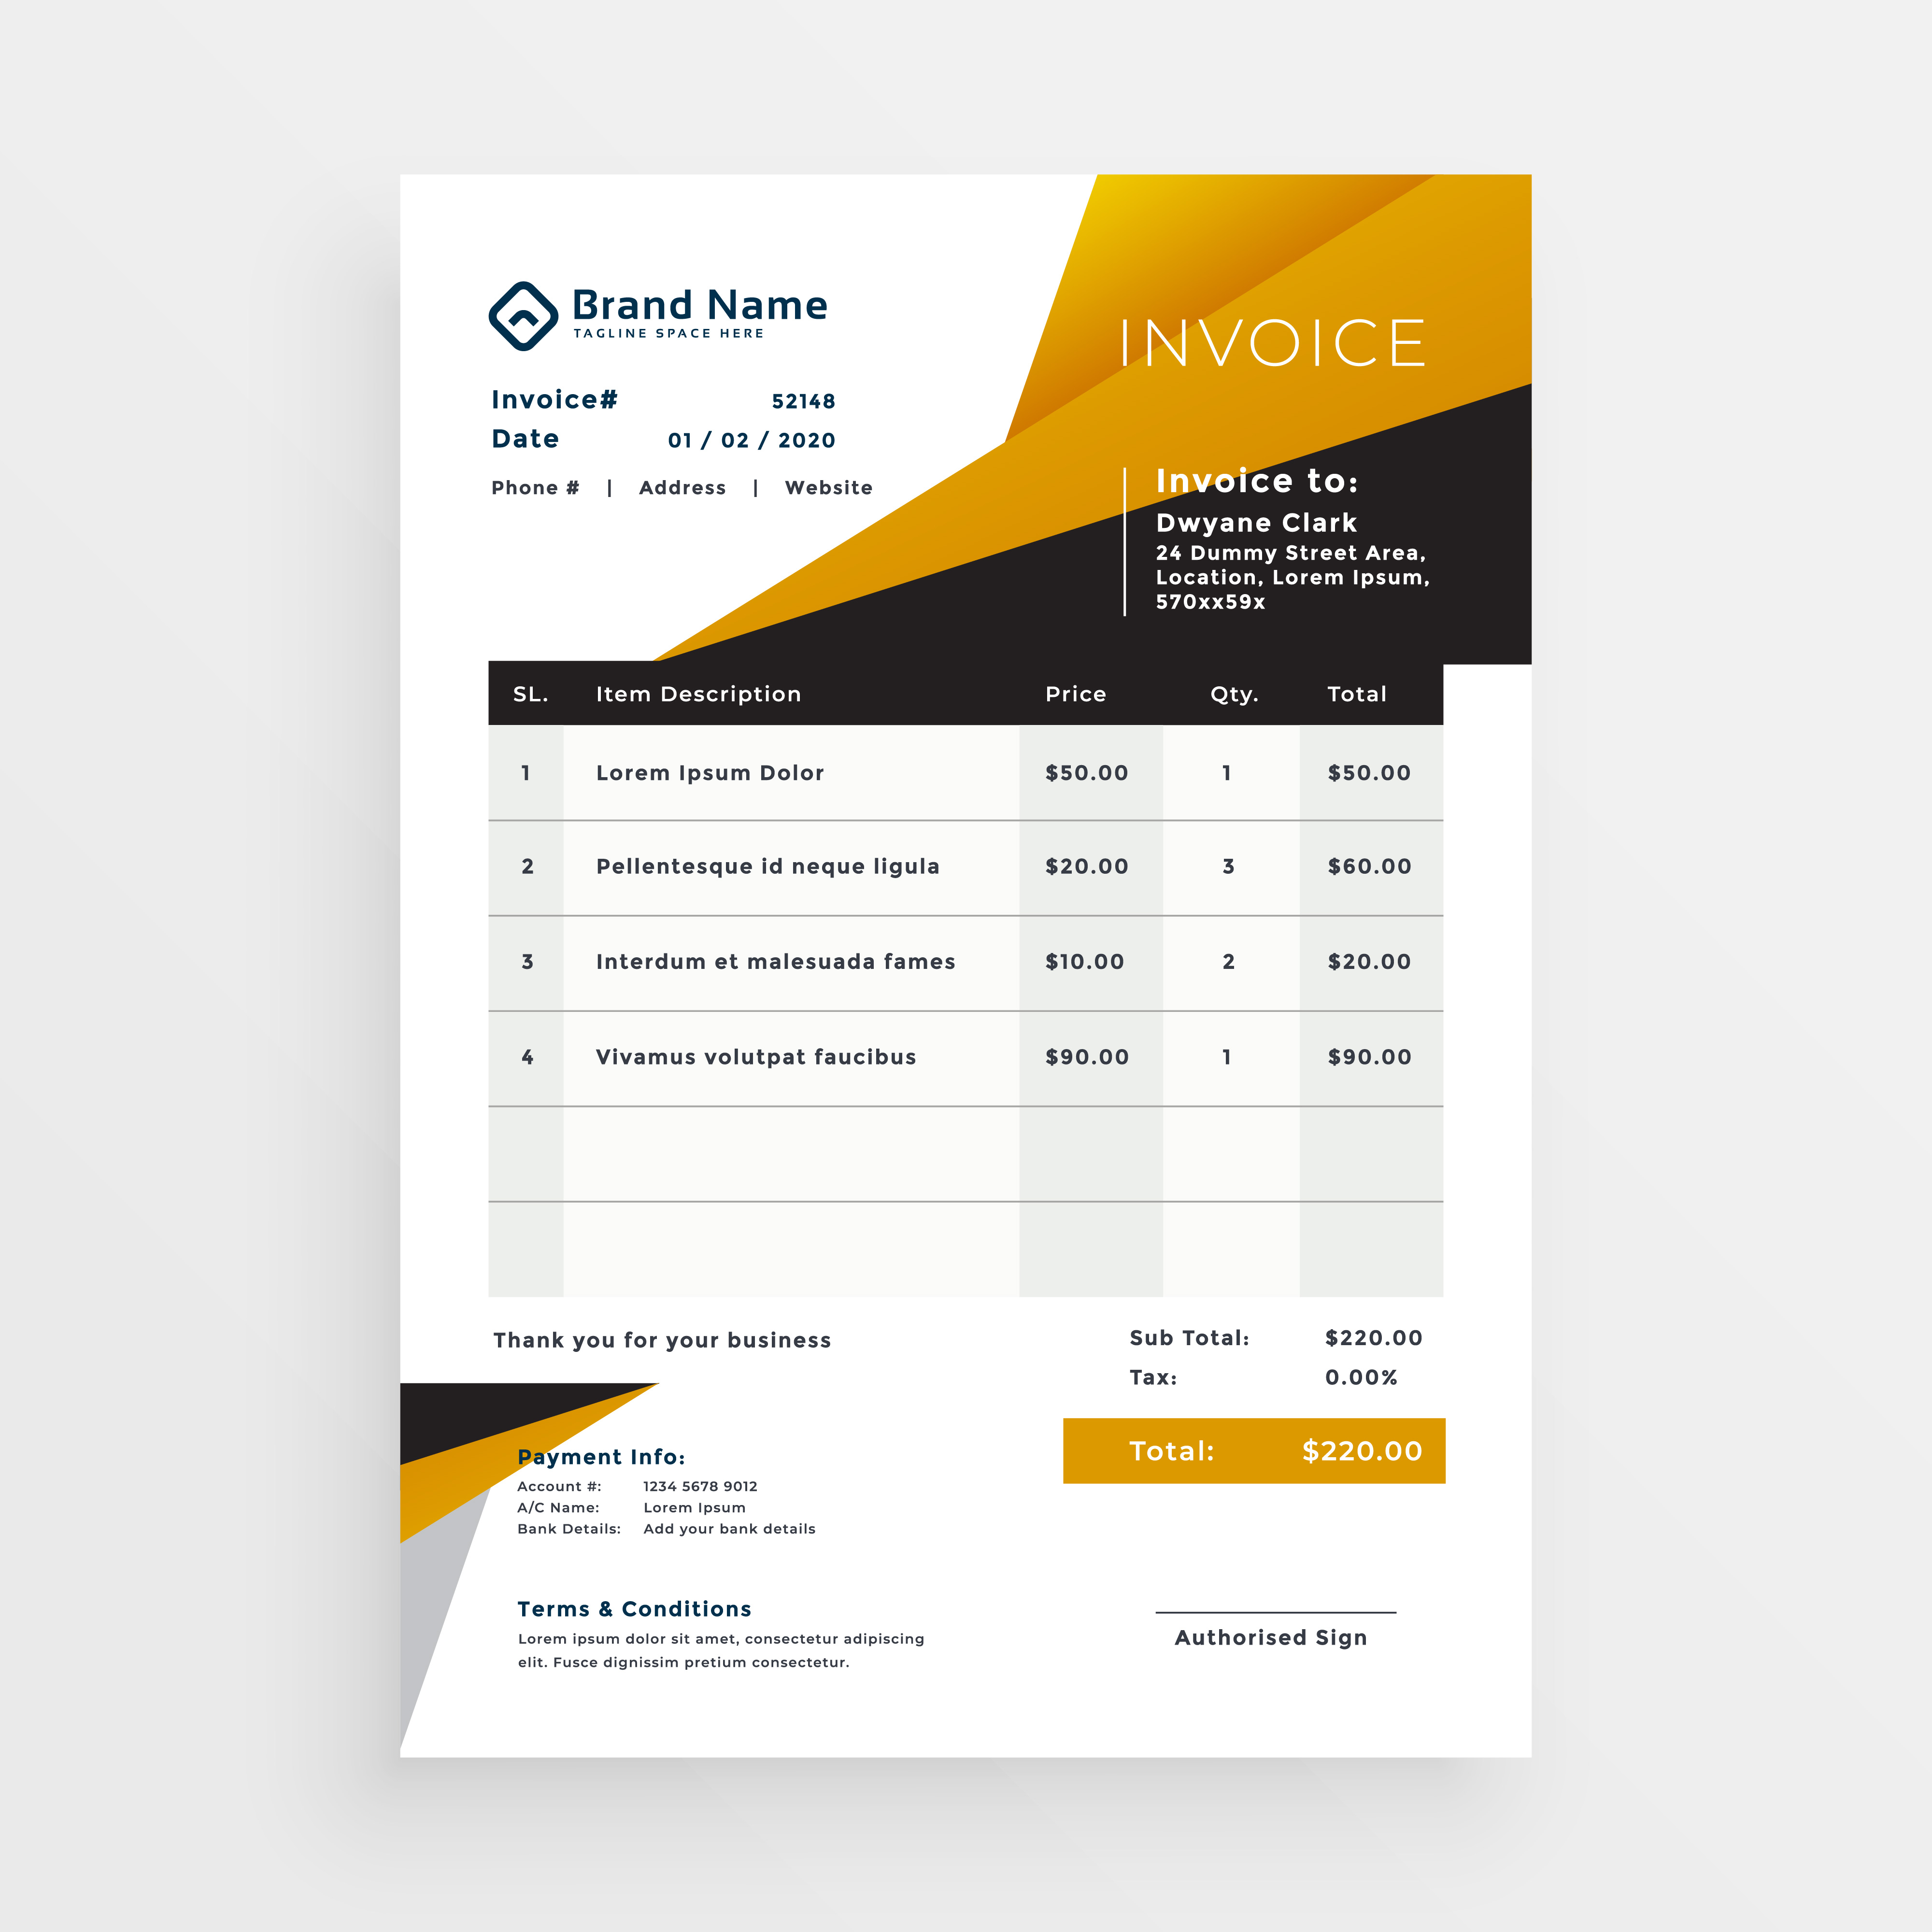 stylish business invoice template design Download Free Vector Art